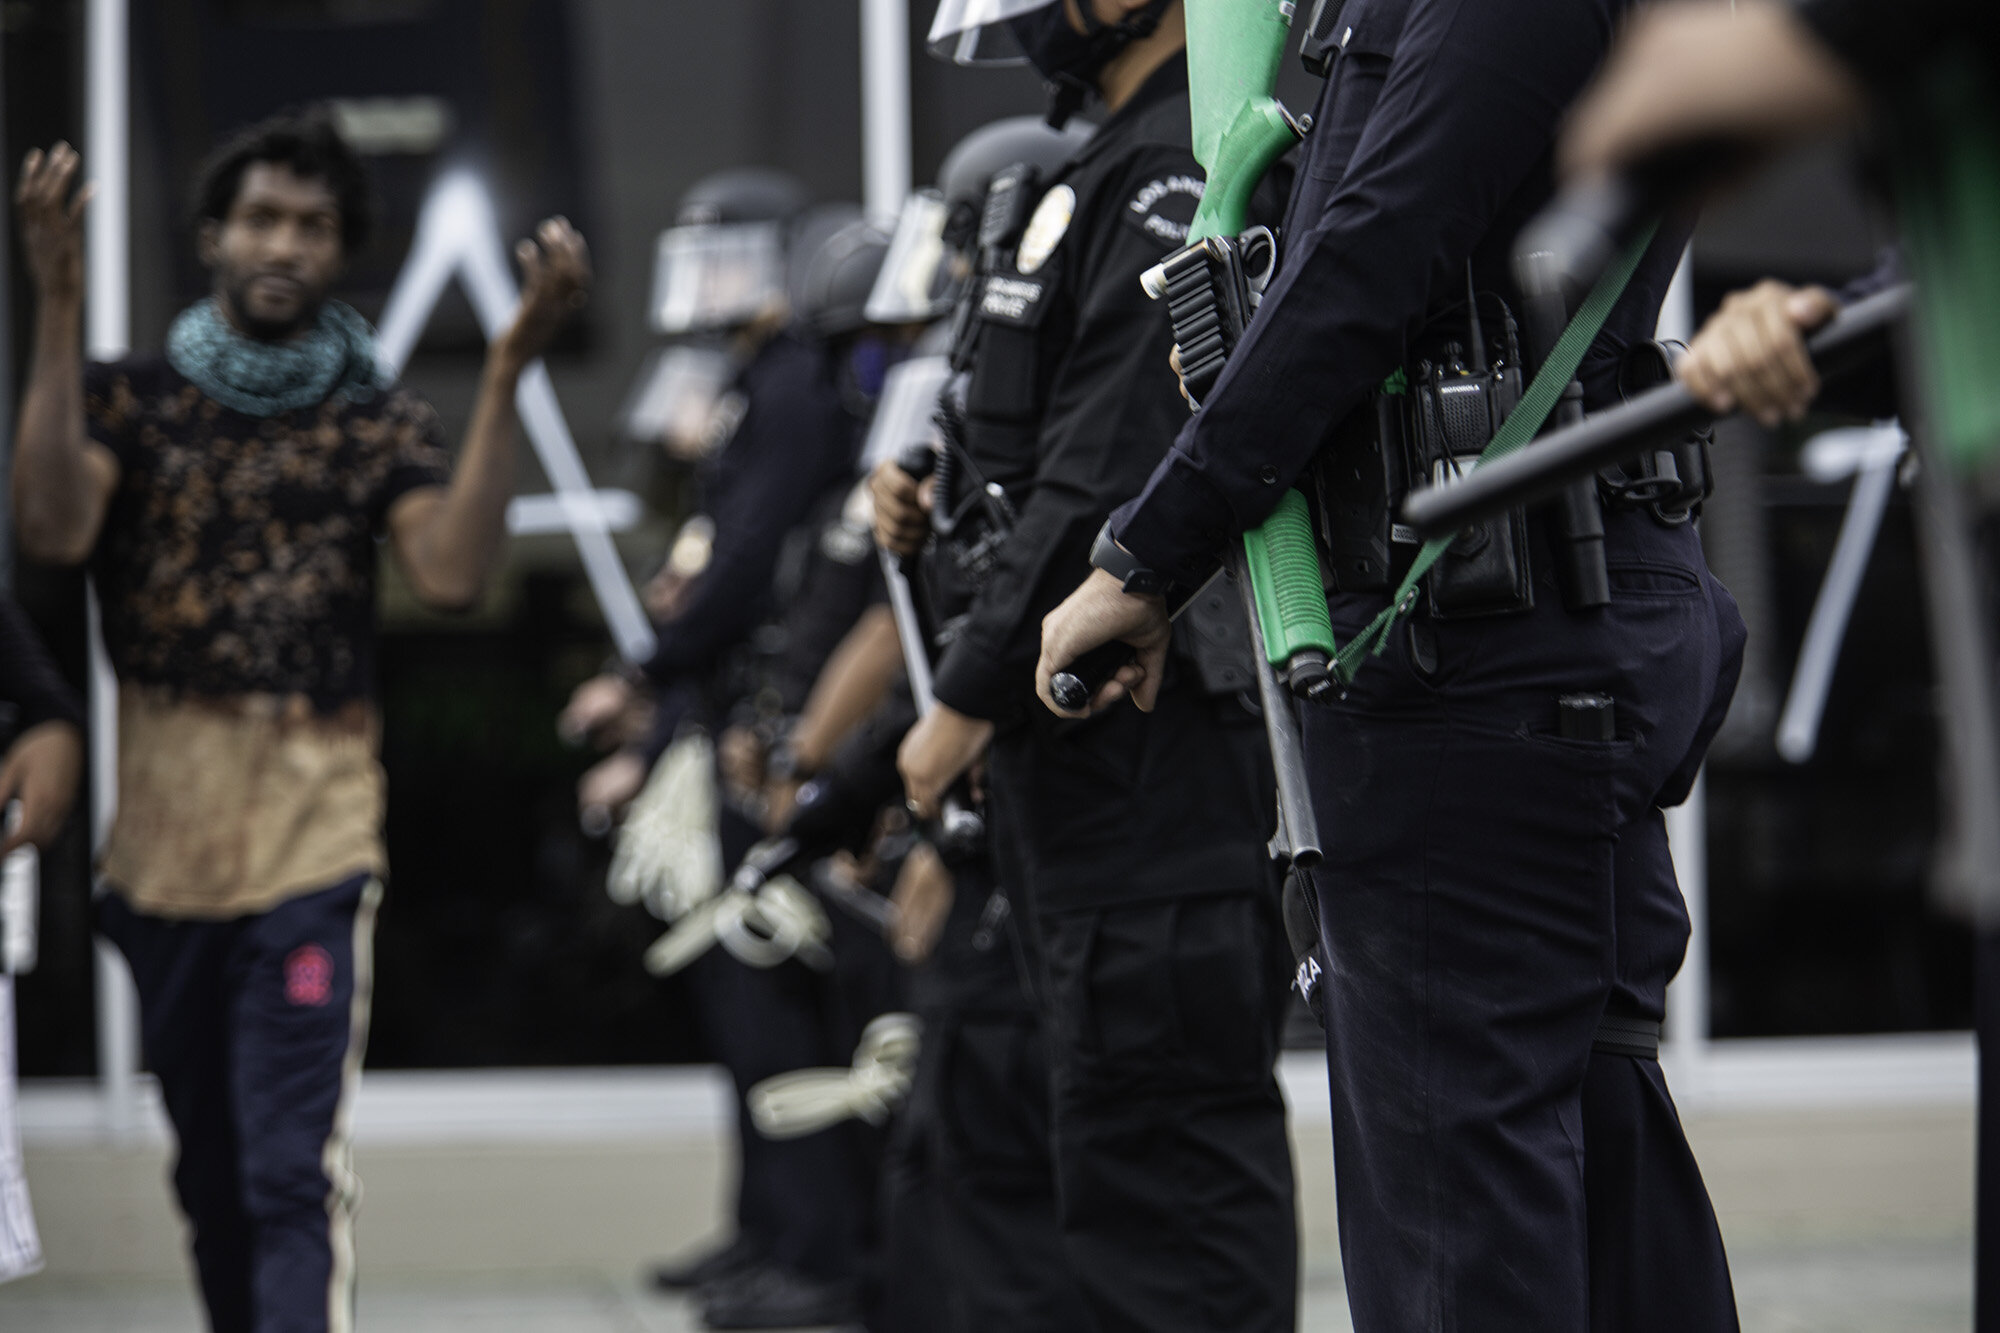  A Protestor walking in front of the police officers during a demonstration in Fairfax District, organized by Black Lives Matter following the death of George Floyd on May 30, 2020 in Los Angeles, Calif.  